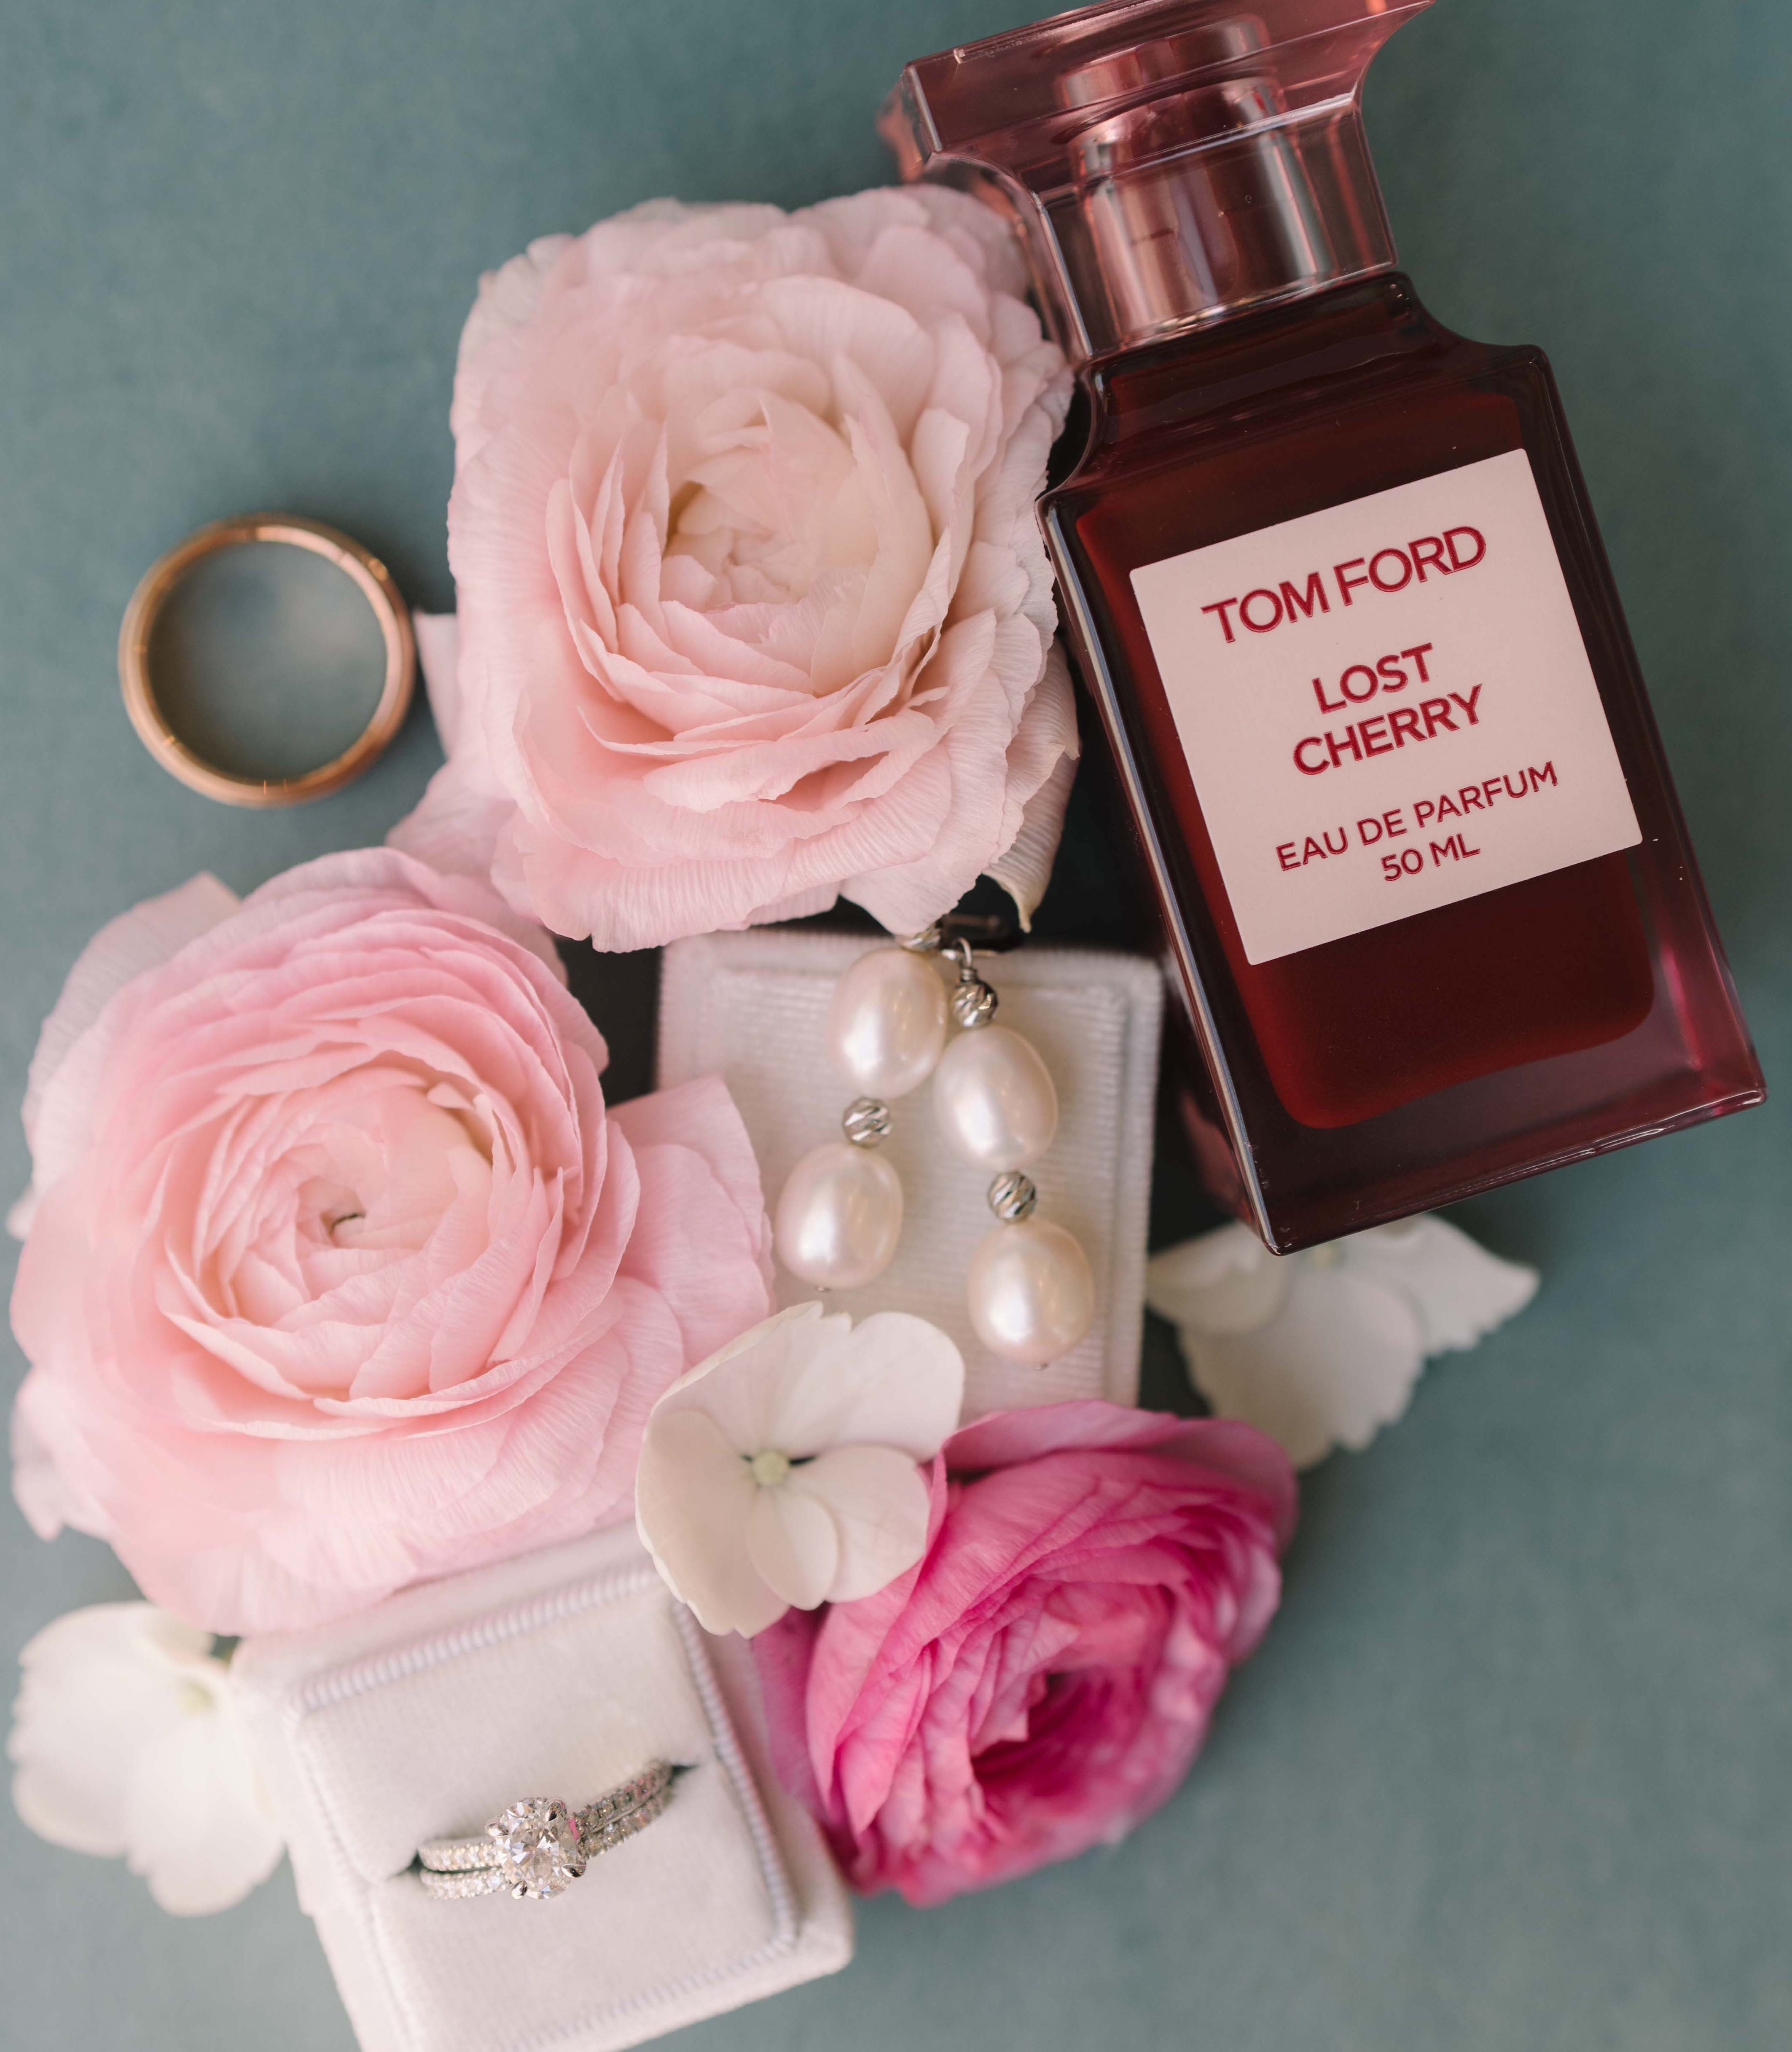 A flatlay full of pink flowers, Tom Ford "Lost Cherry" perfume and pearl earrings with an engagement ring.